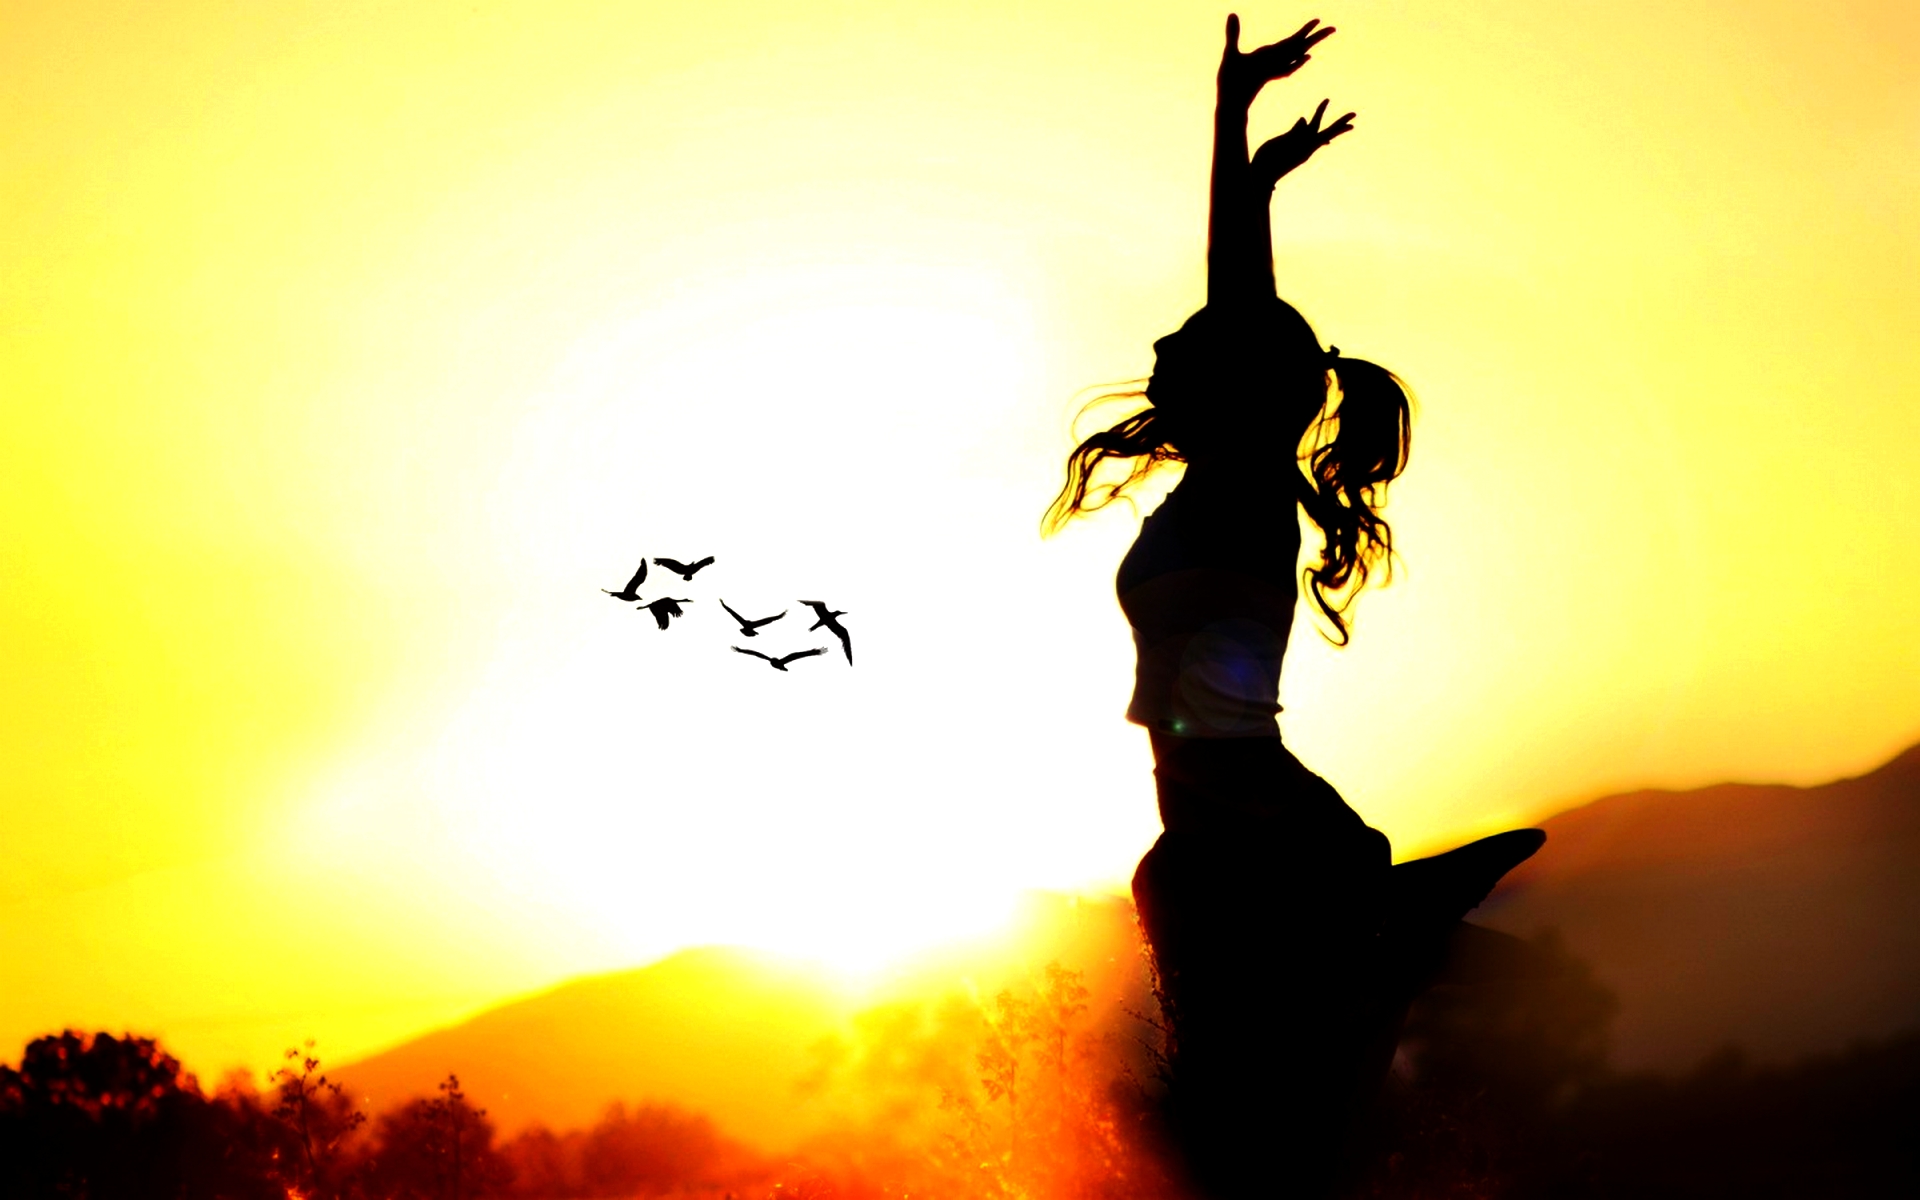 Silhouette Wallpapers PC Silhouette Most Beautiful Images